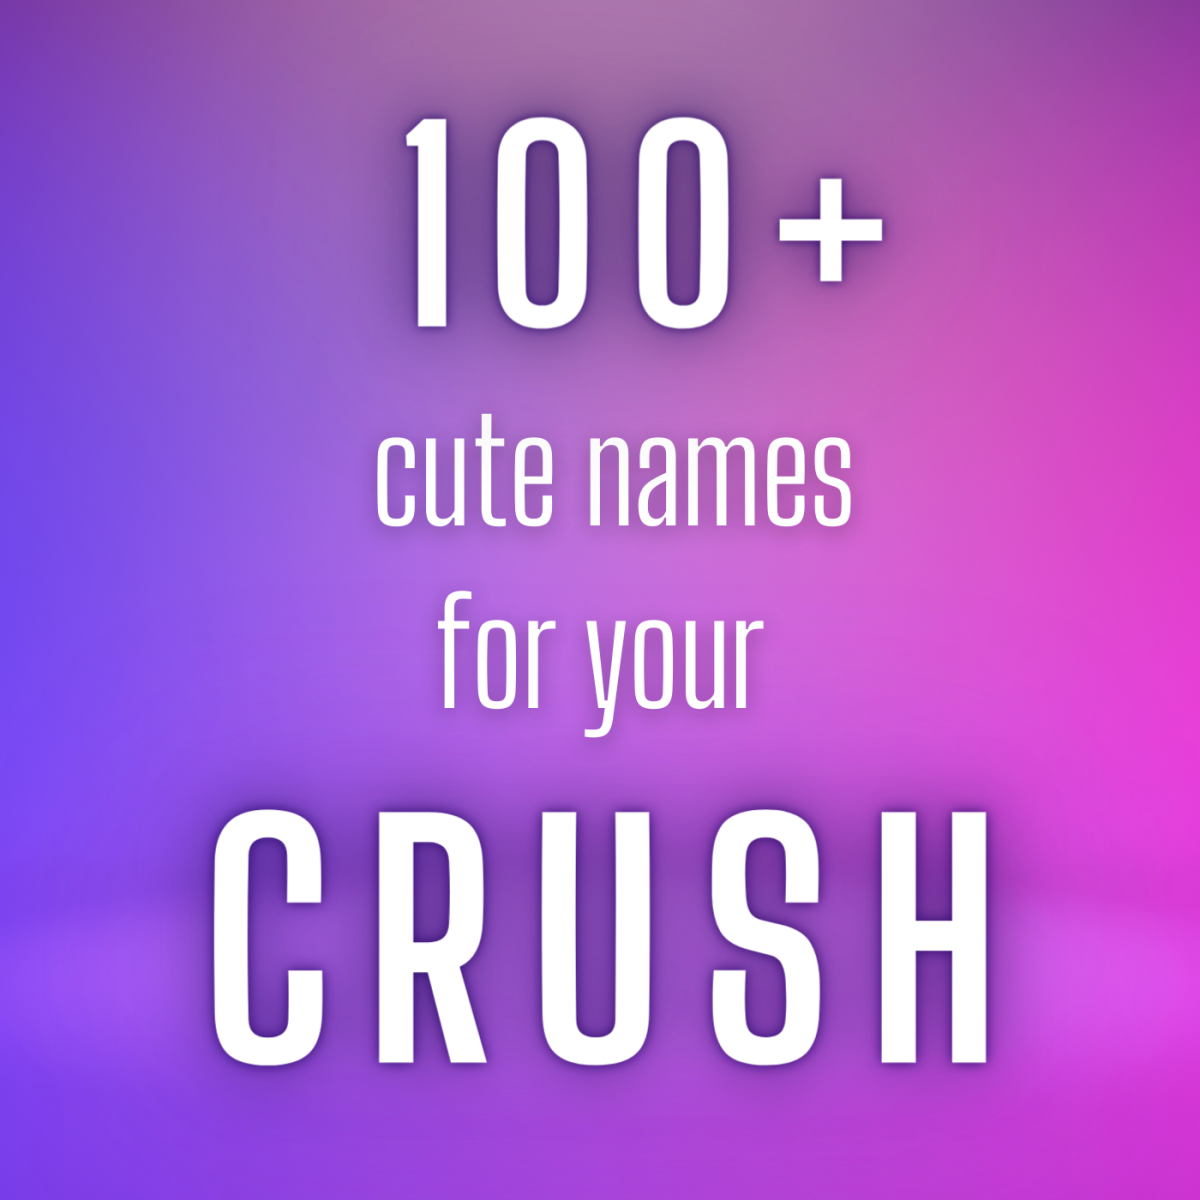 100+ Cute Names to Call Your Crush